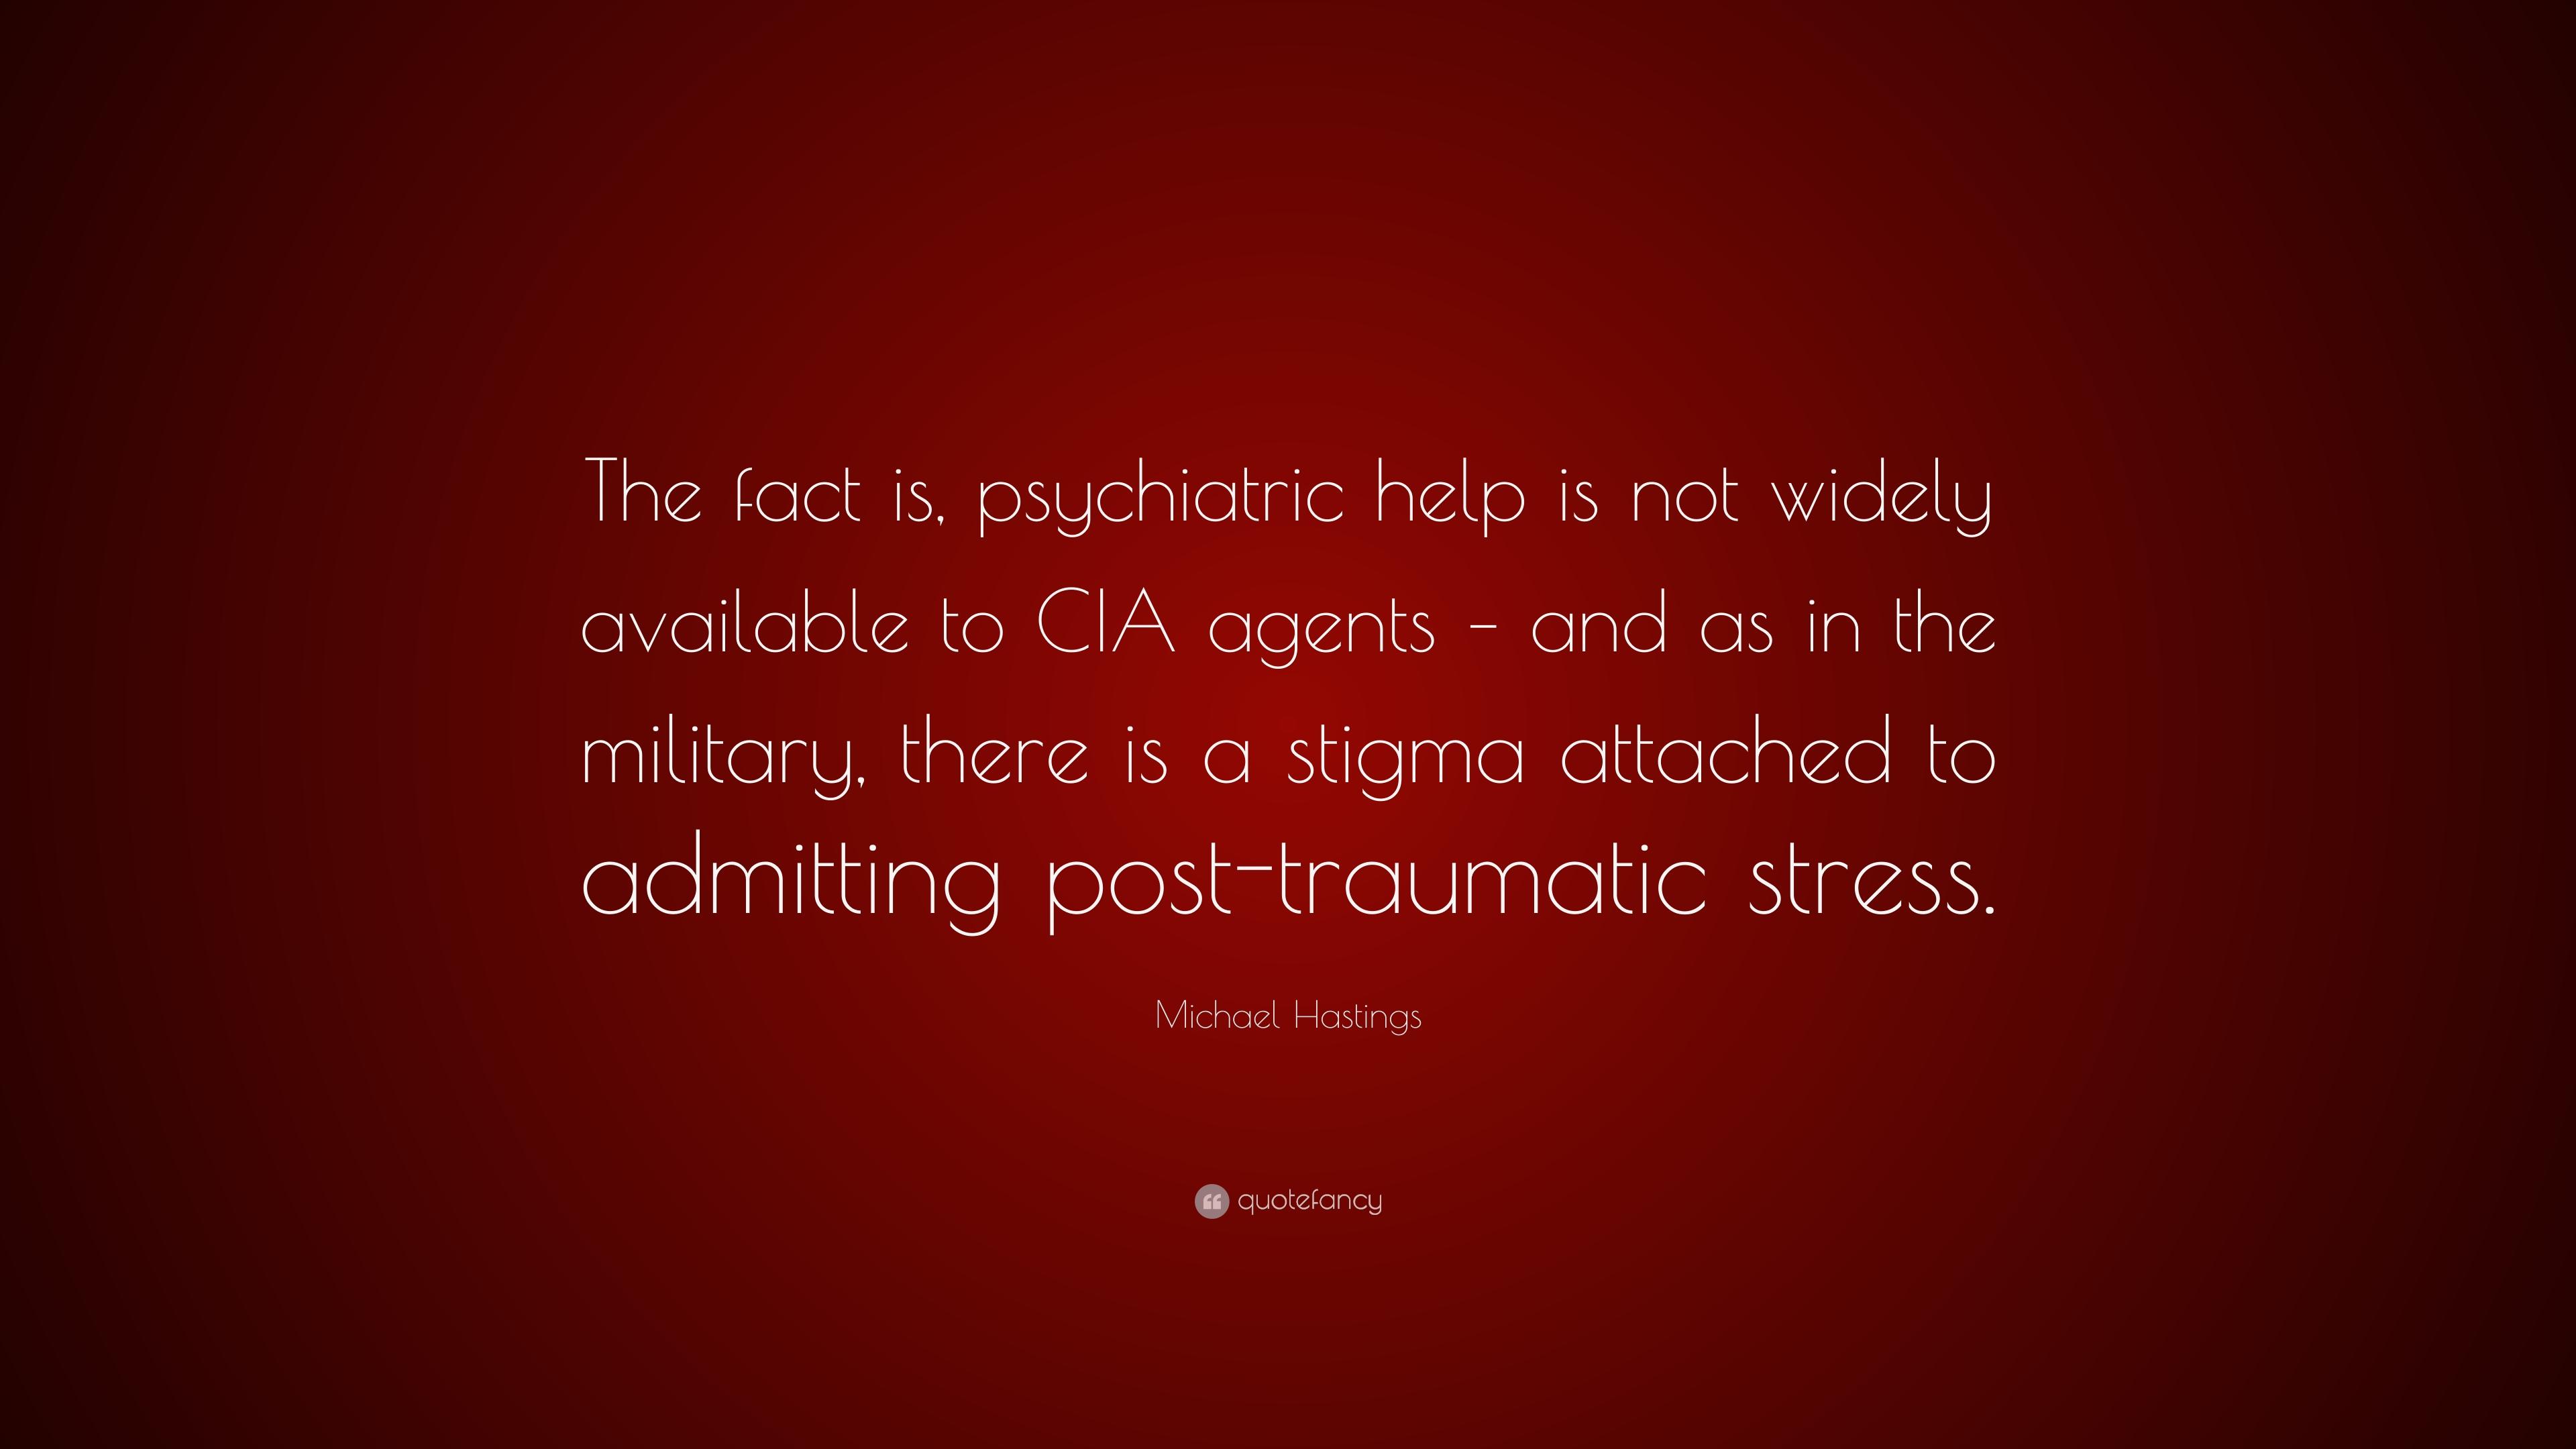 Michael Hastings Quote: “The fact is, psychiatric help is